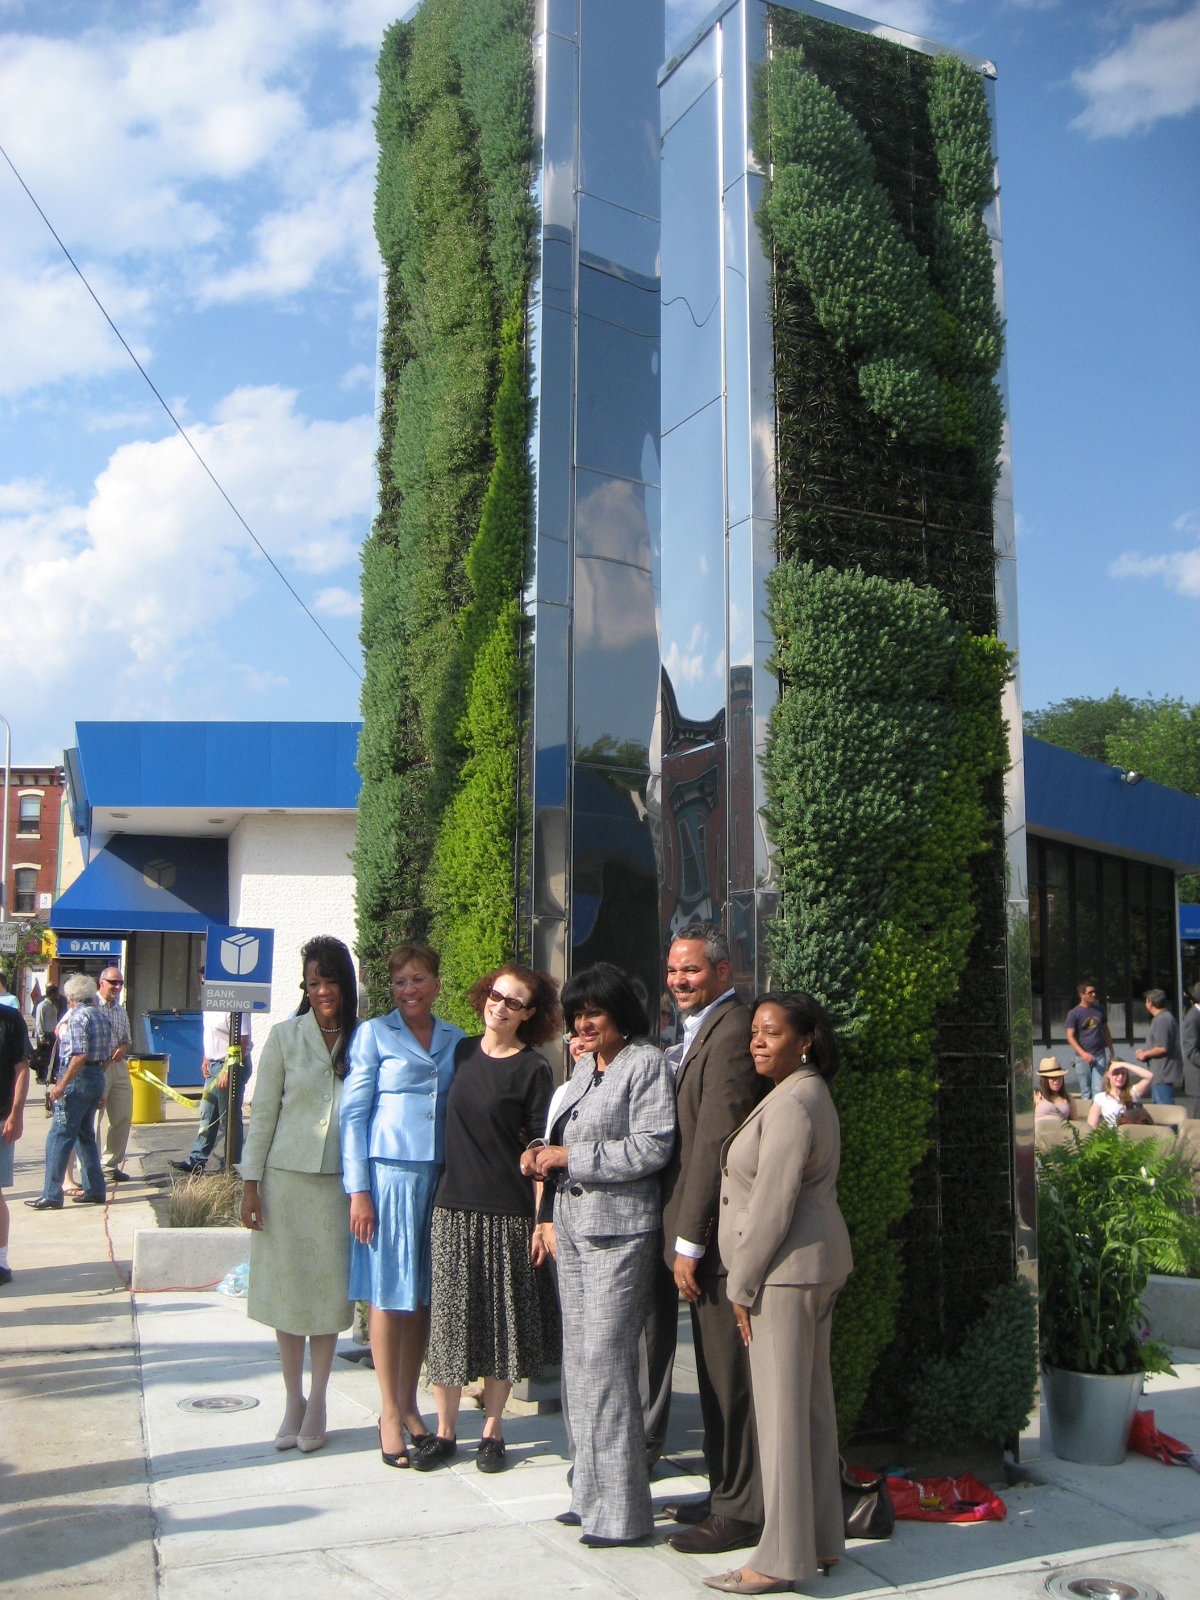 Organizers from Mural Arts, Sustainable Communities Initiative West and United Bank of Philadelphia, dedicate the new public art